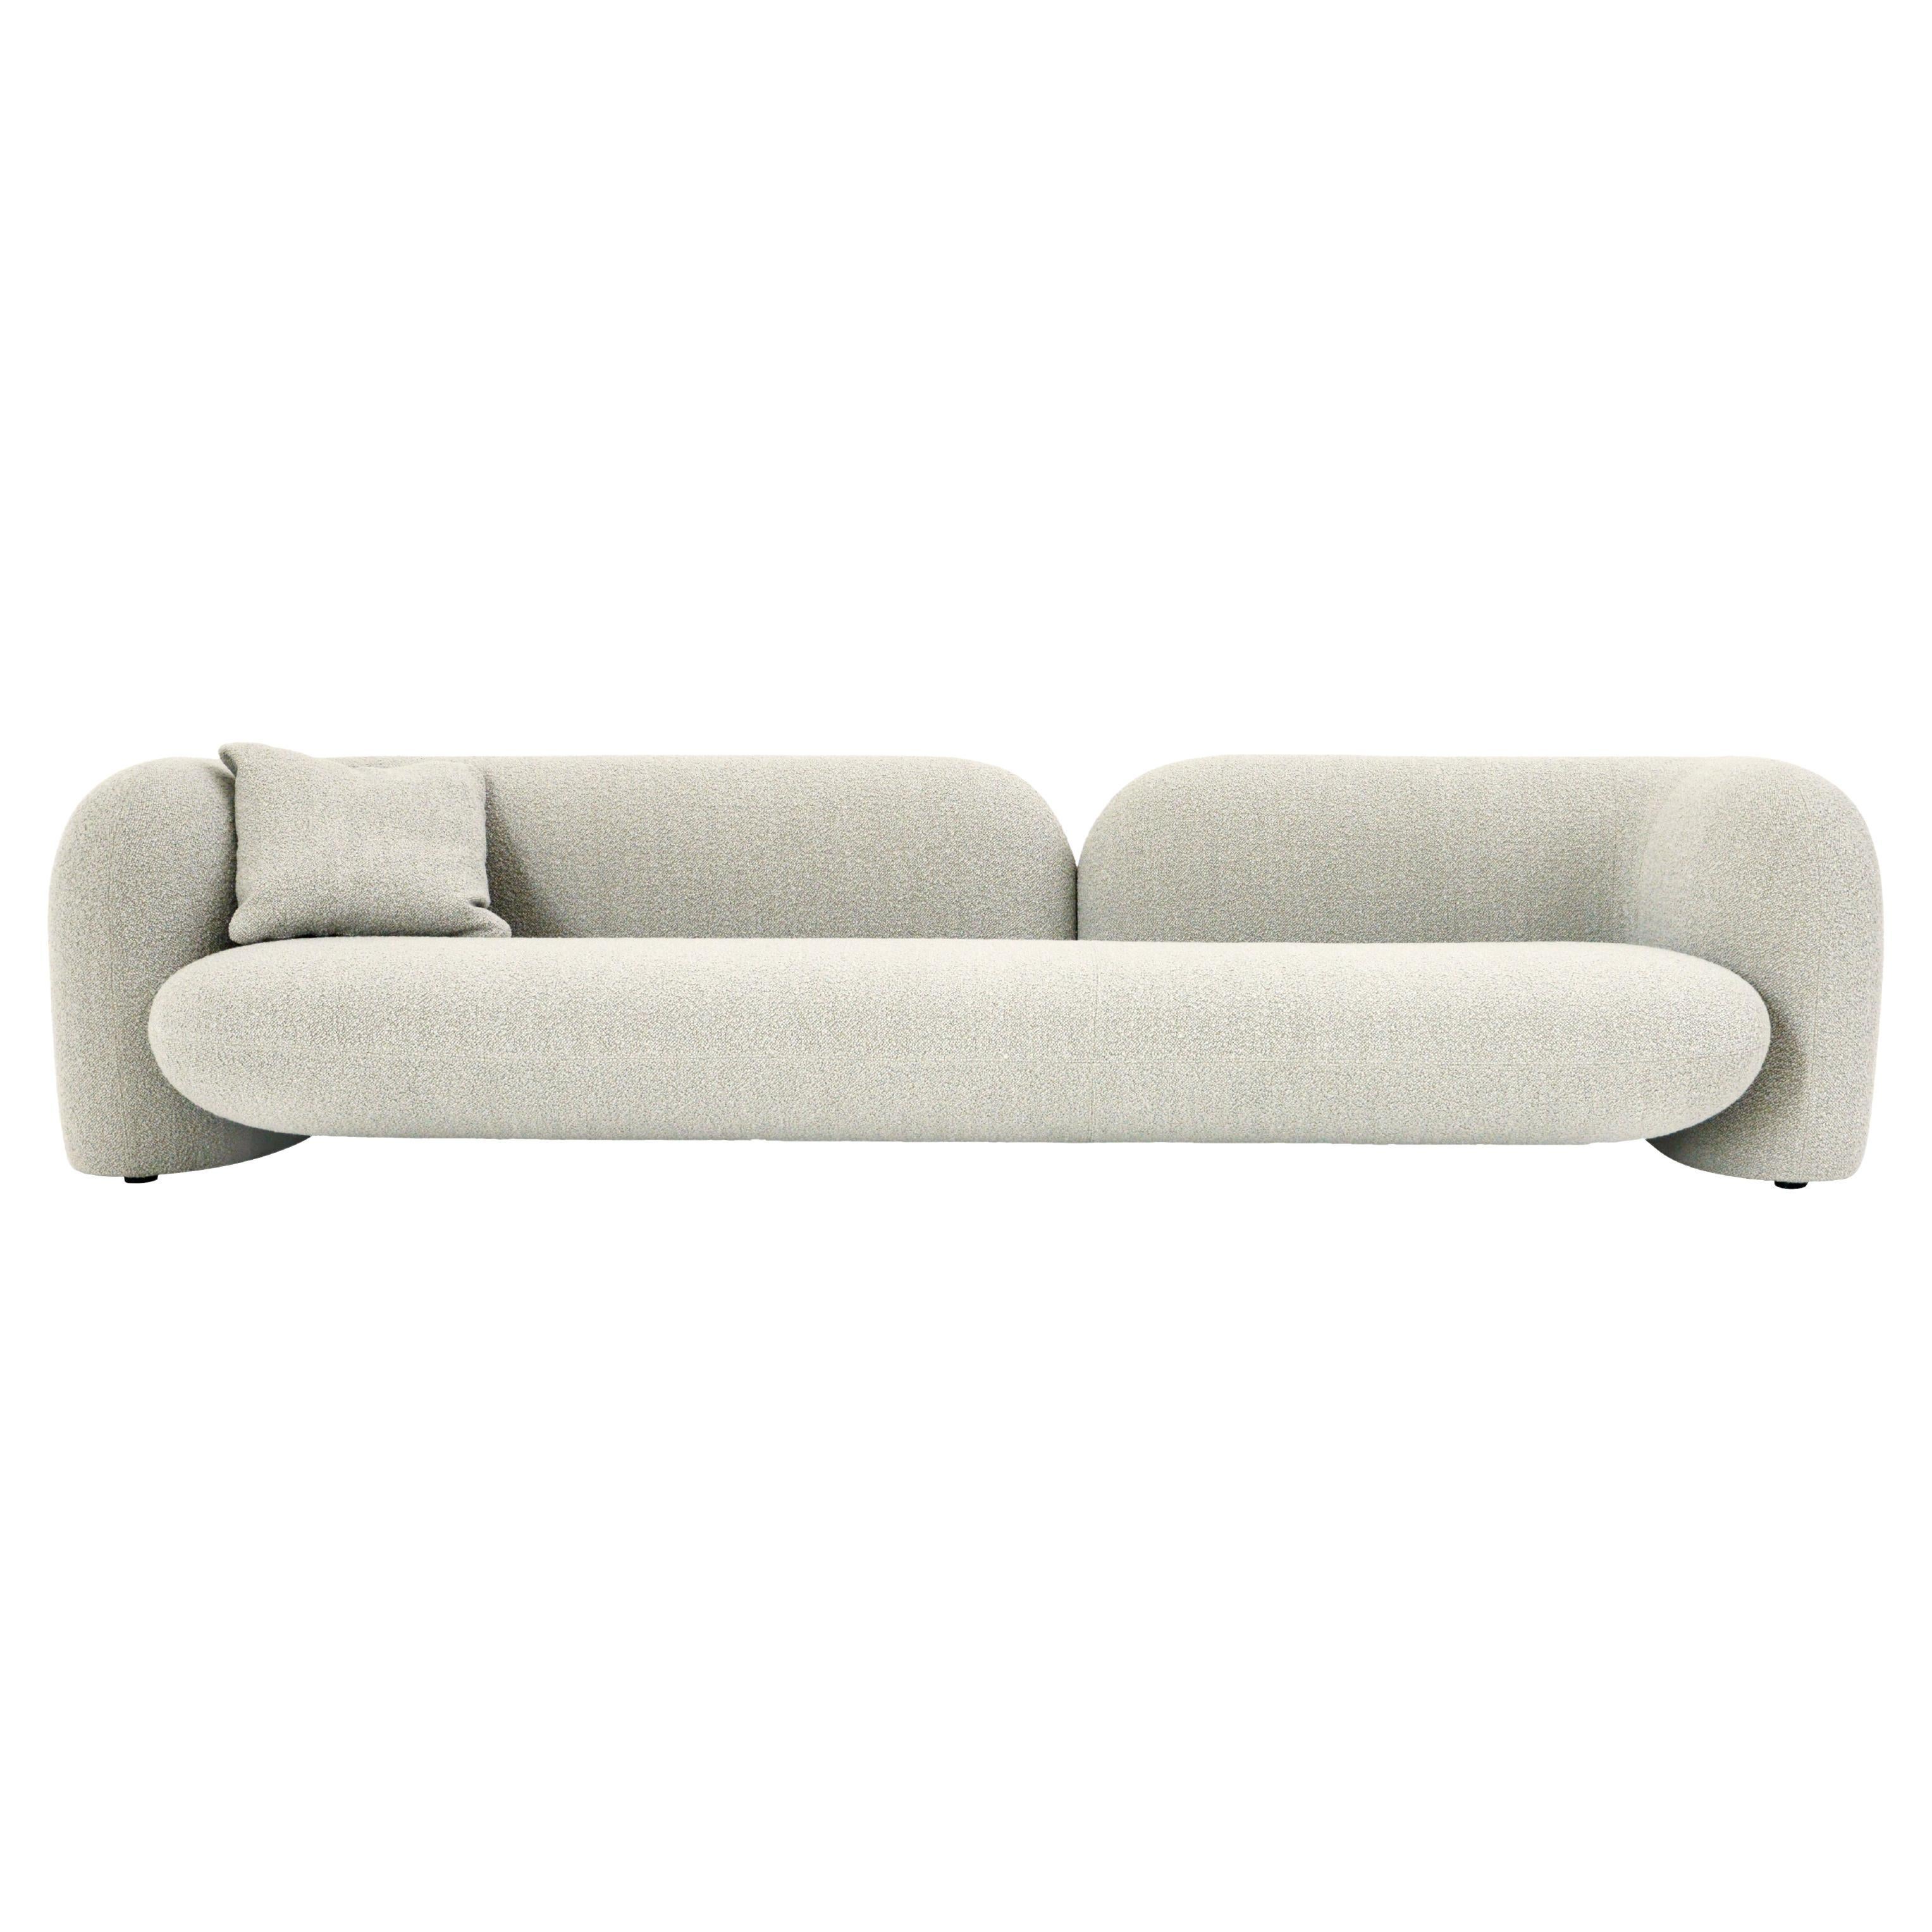 Contemporary Three-Seater Sofa by Hessentia Upholstered in Fabric, Bouclé, Grey